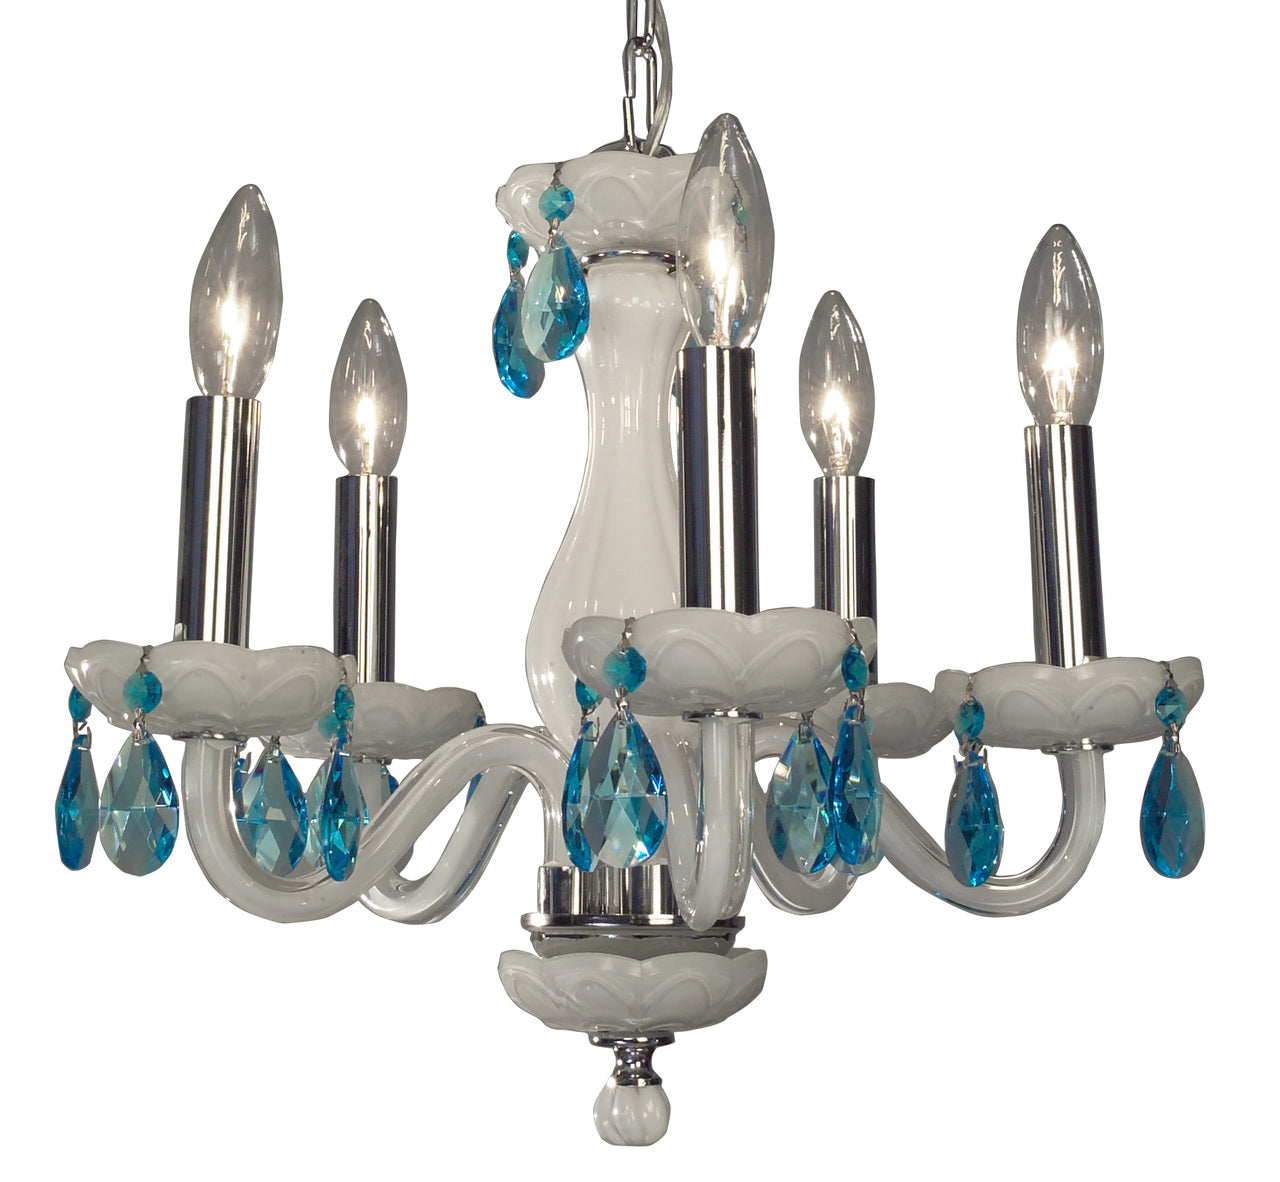 Classic Lighting 82045 WHT CSA Monaco Crystal Chandelier in White (Imported from Spain)